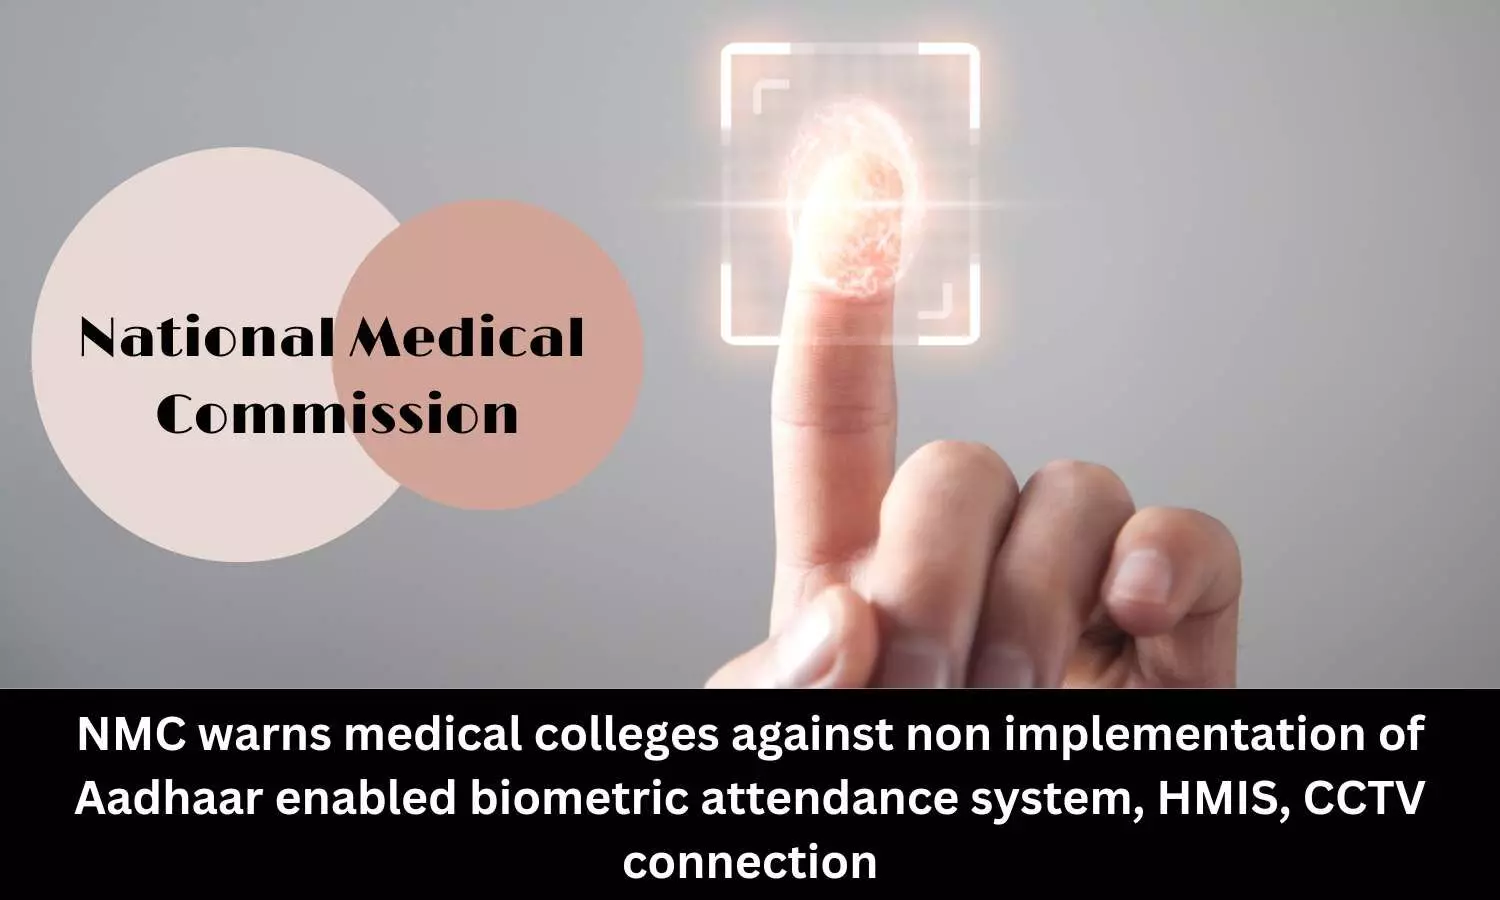 NMC asks medical colleges to implement biometric-attendance, CCTV to prevent adverse action